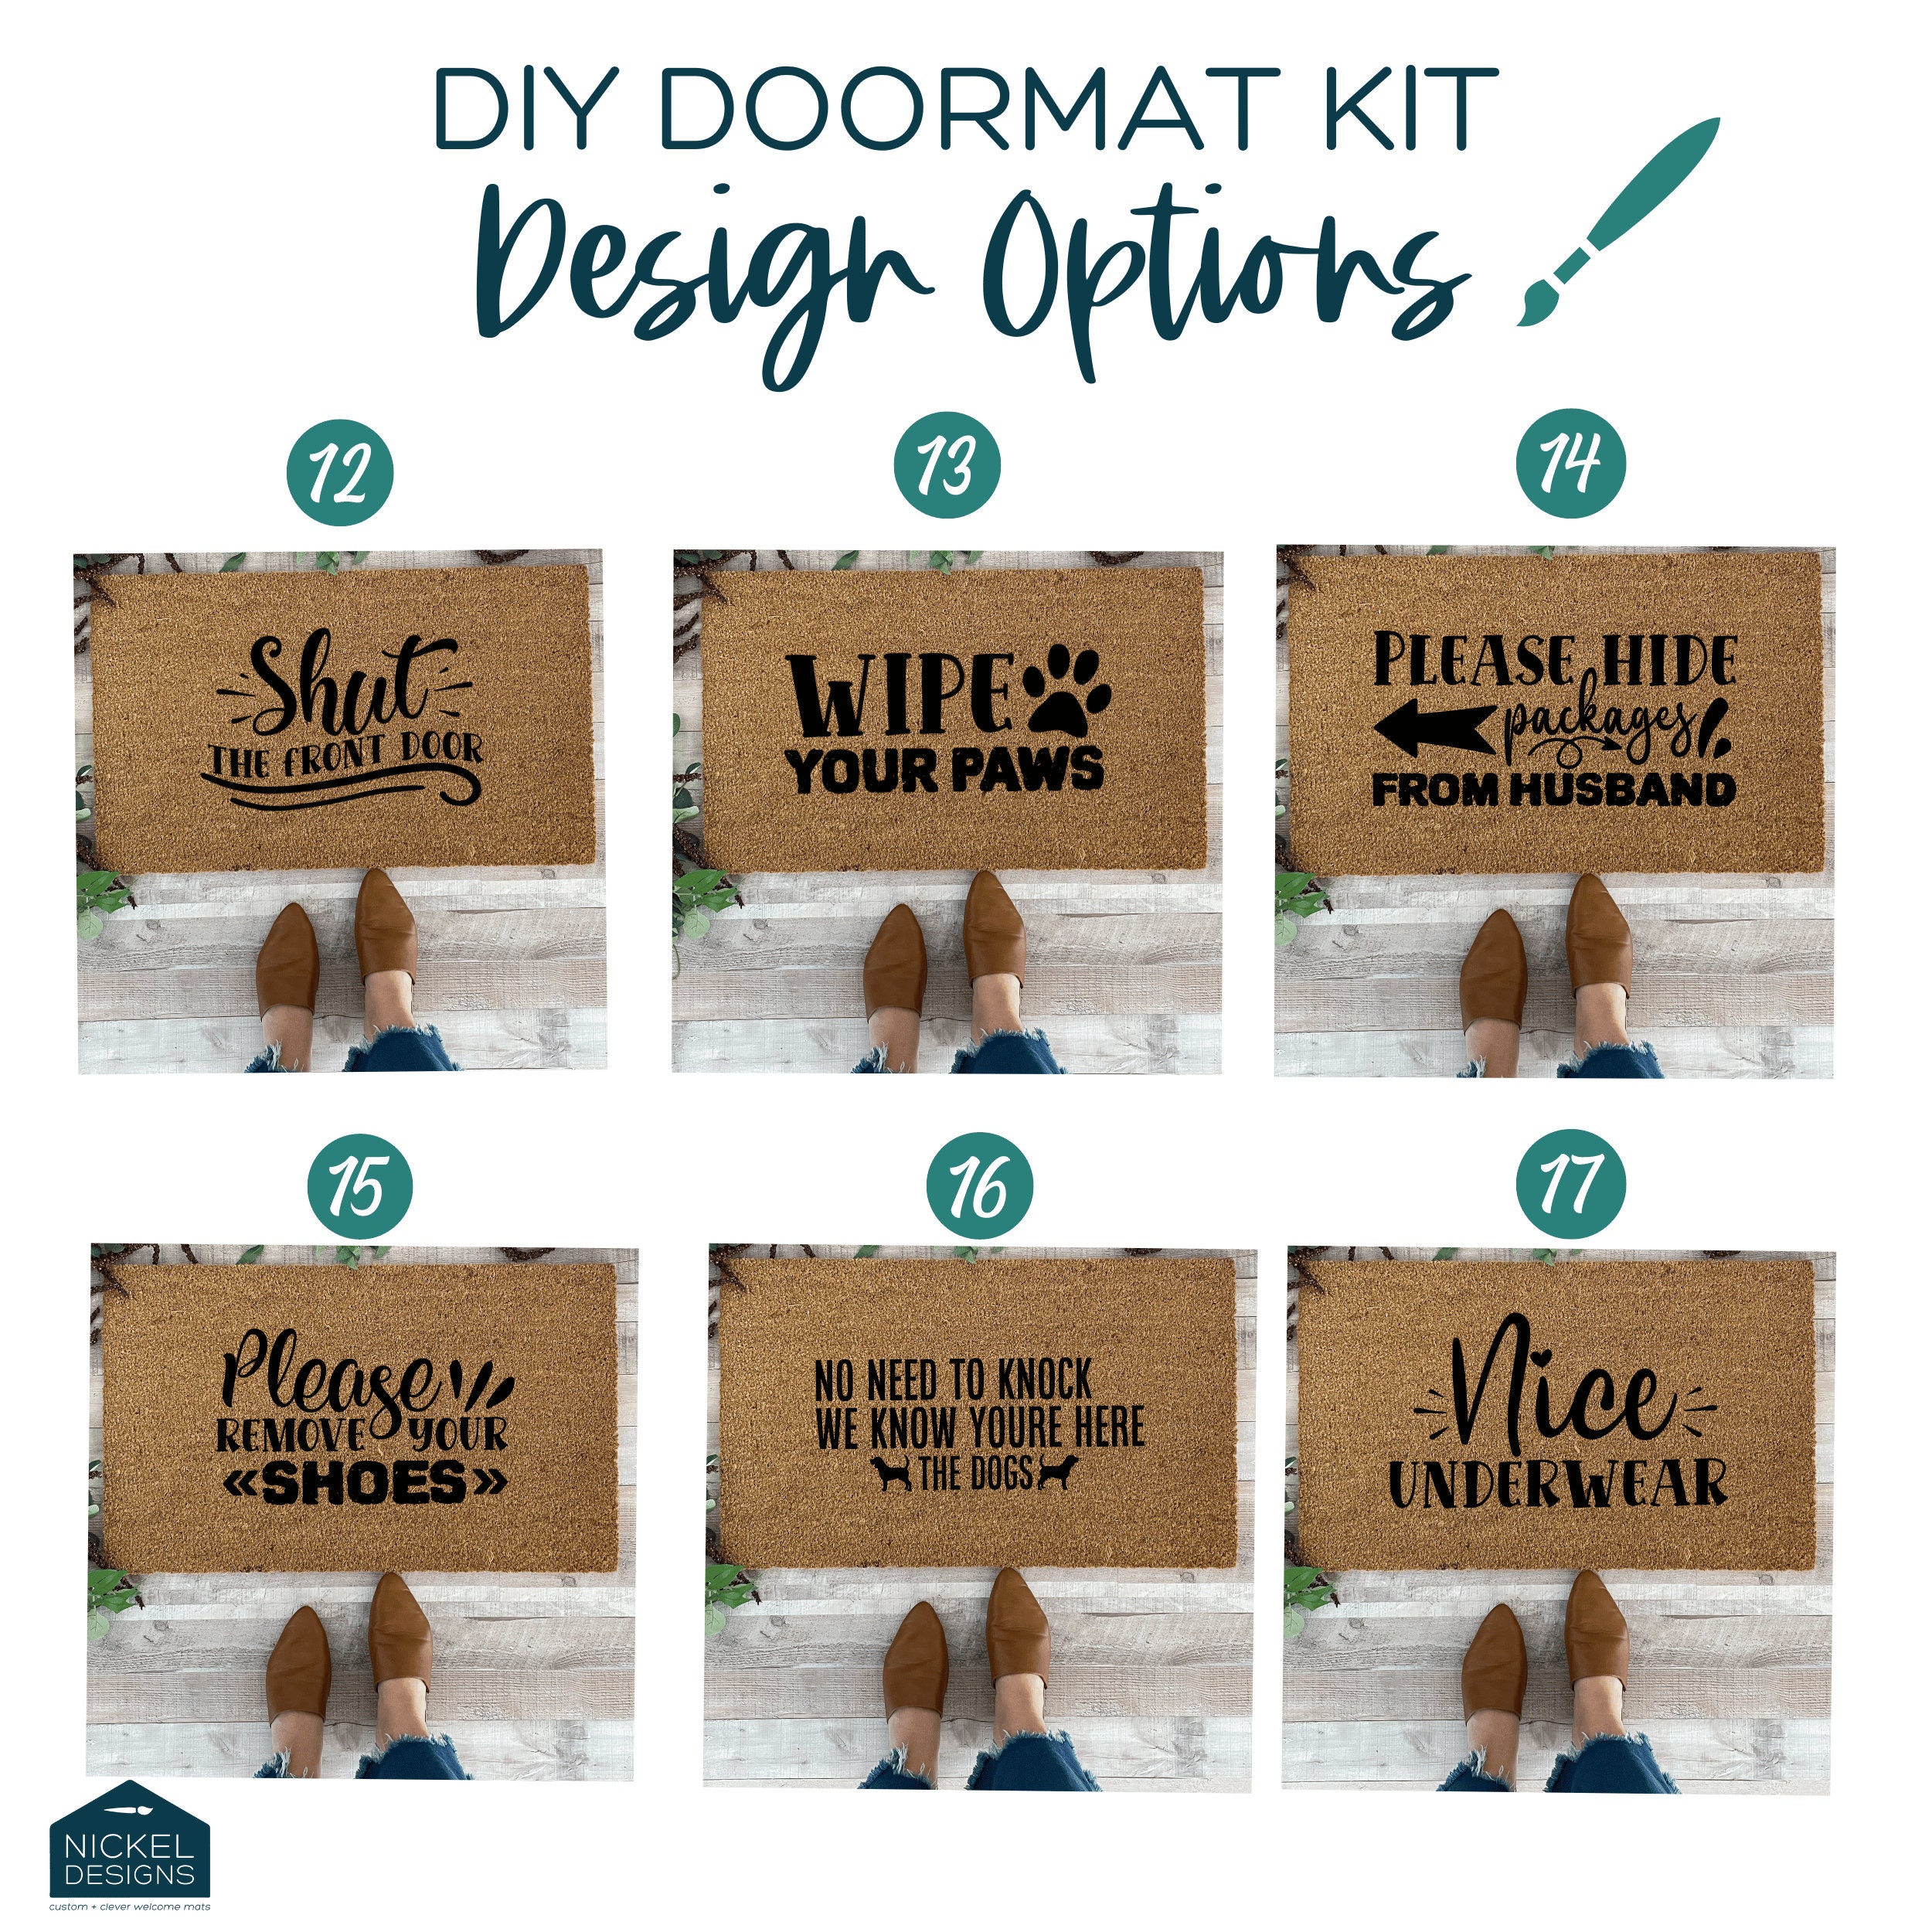 DIY Doormat Kit, DIY Kit Adults, Christmas Gifts Mom, Craft Kit for Adults,  PYO Stencil, Paint Your Own, Funny Doormat, Ladies Night In 